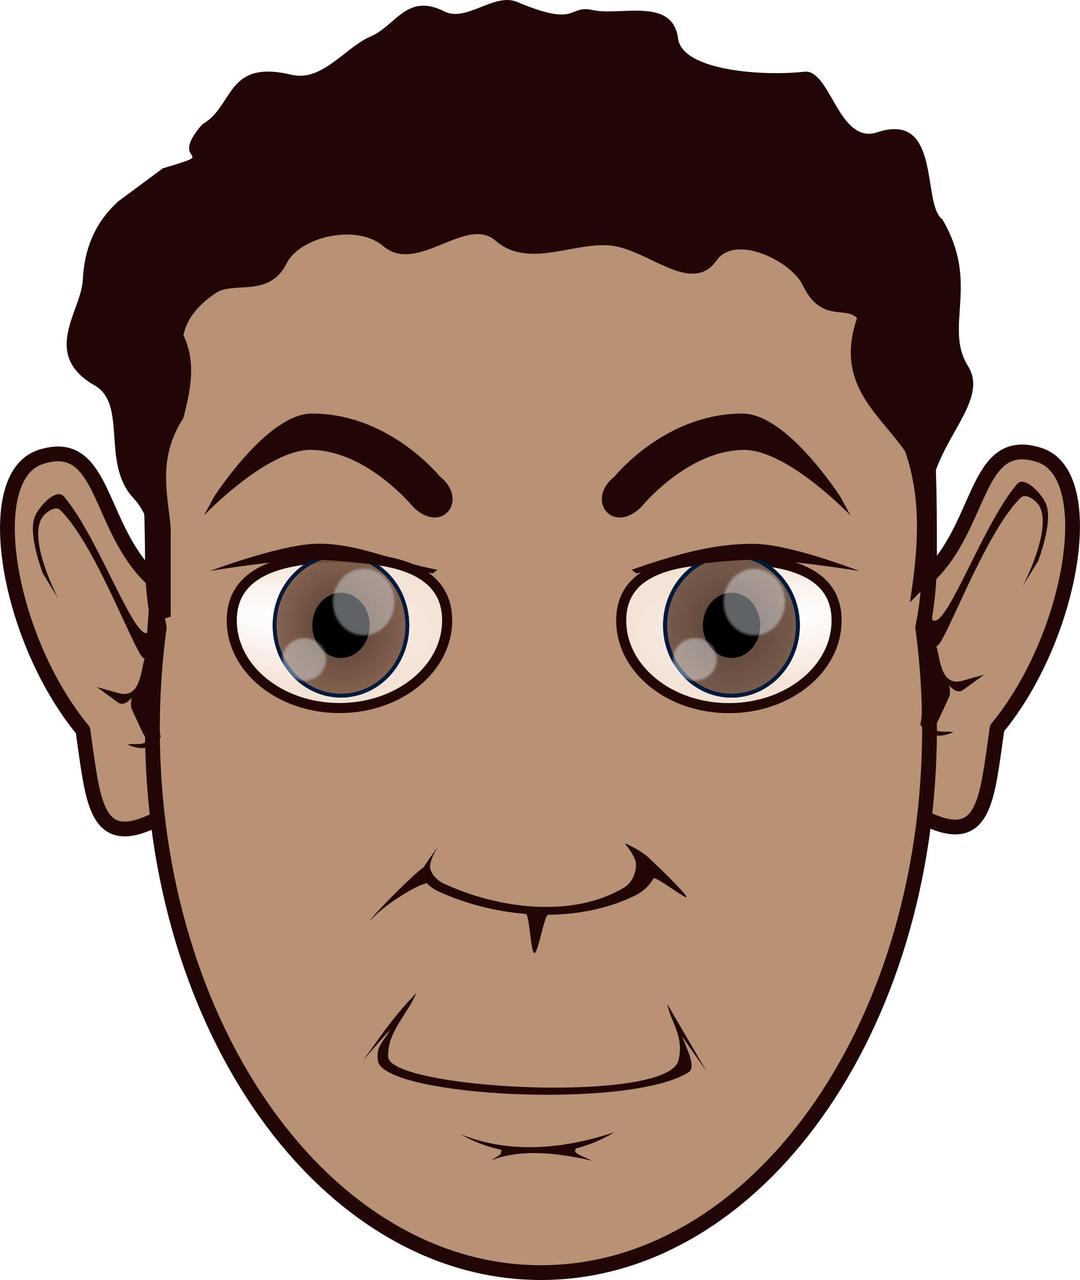 African Kid's Head png transparent